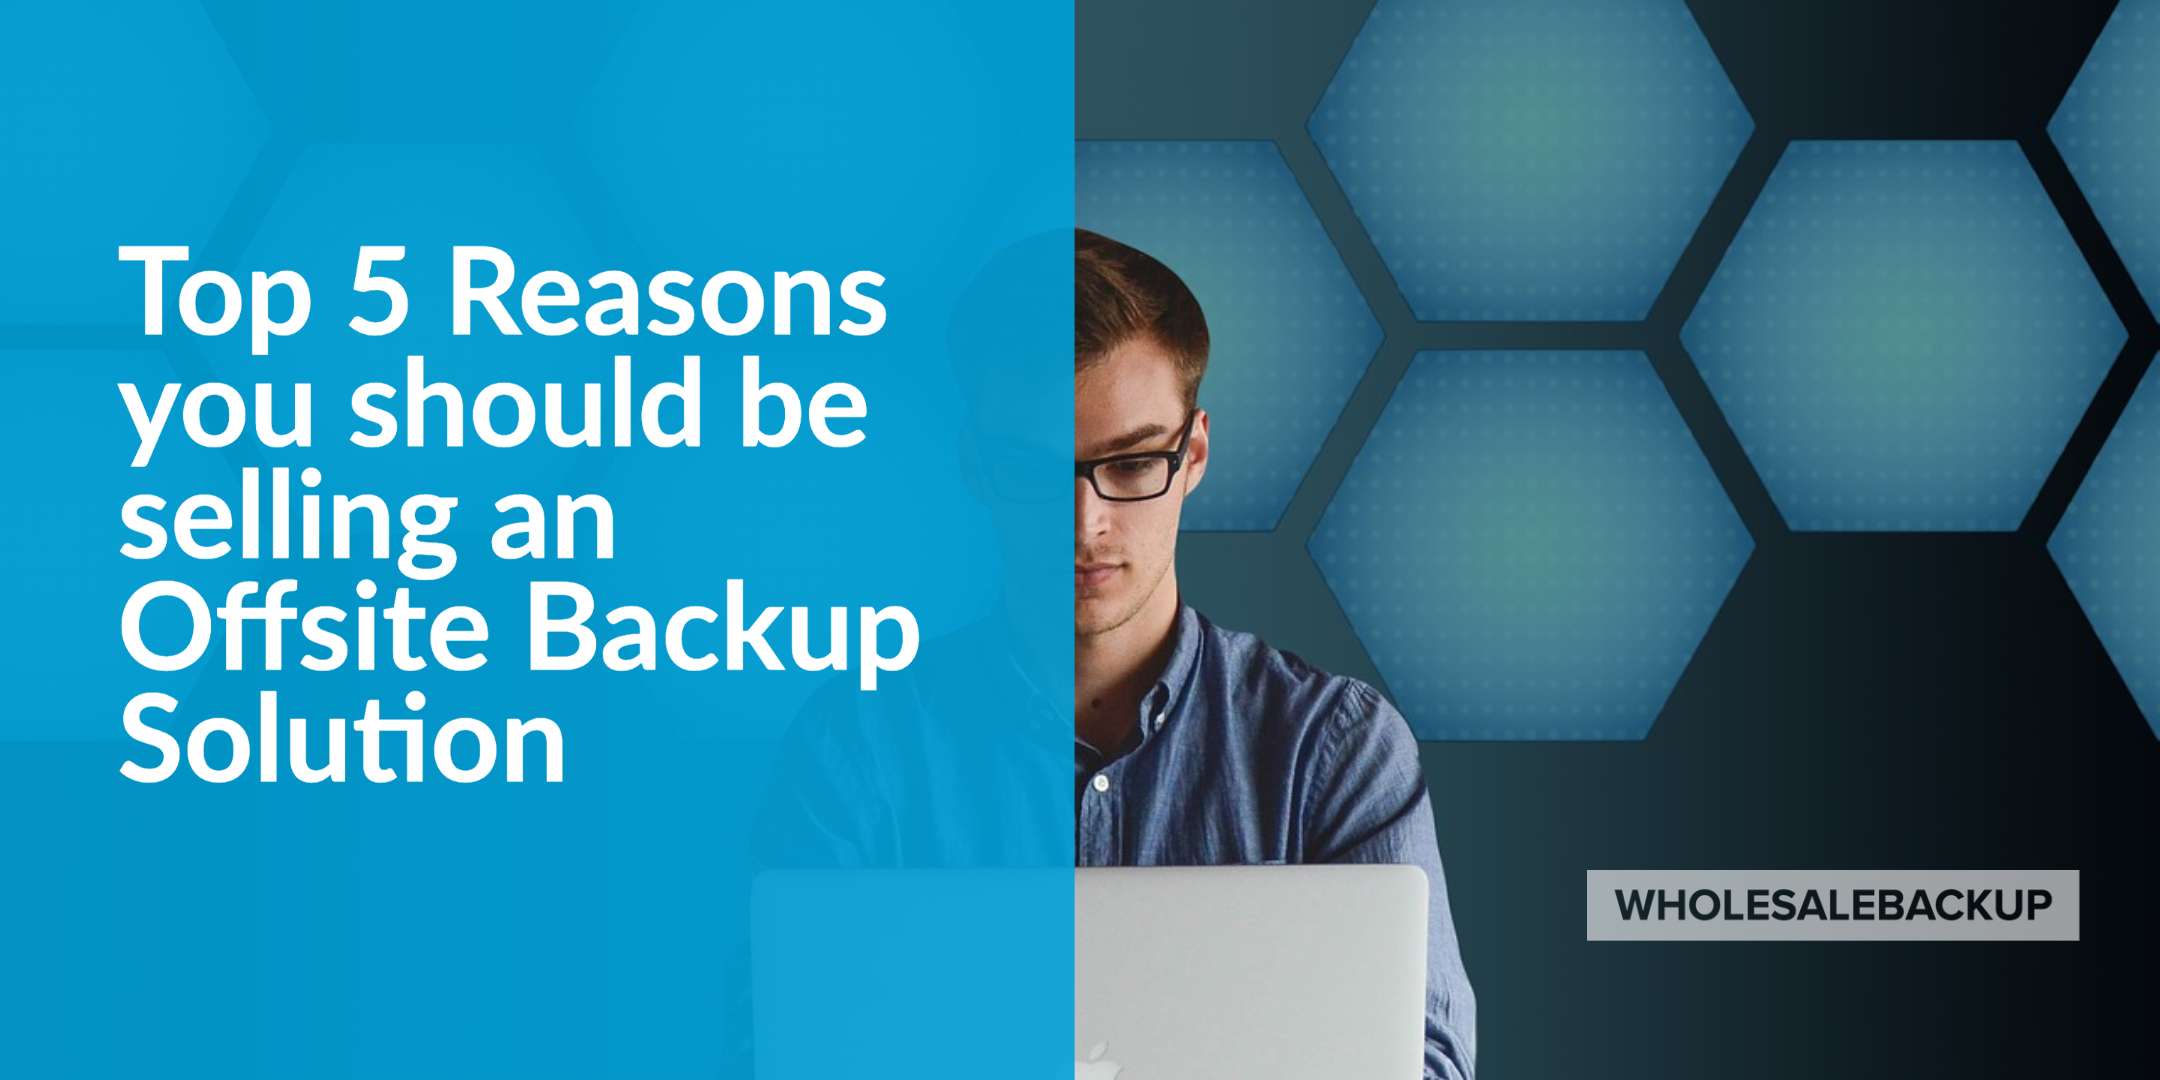 5 reasons for selling offsite backup solutions